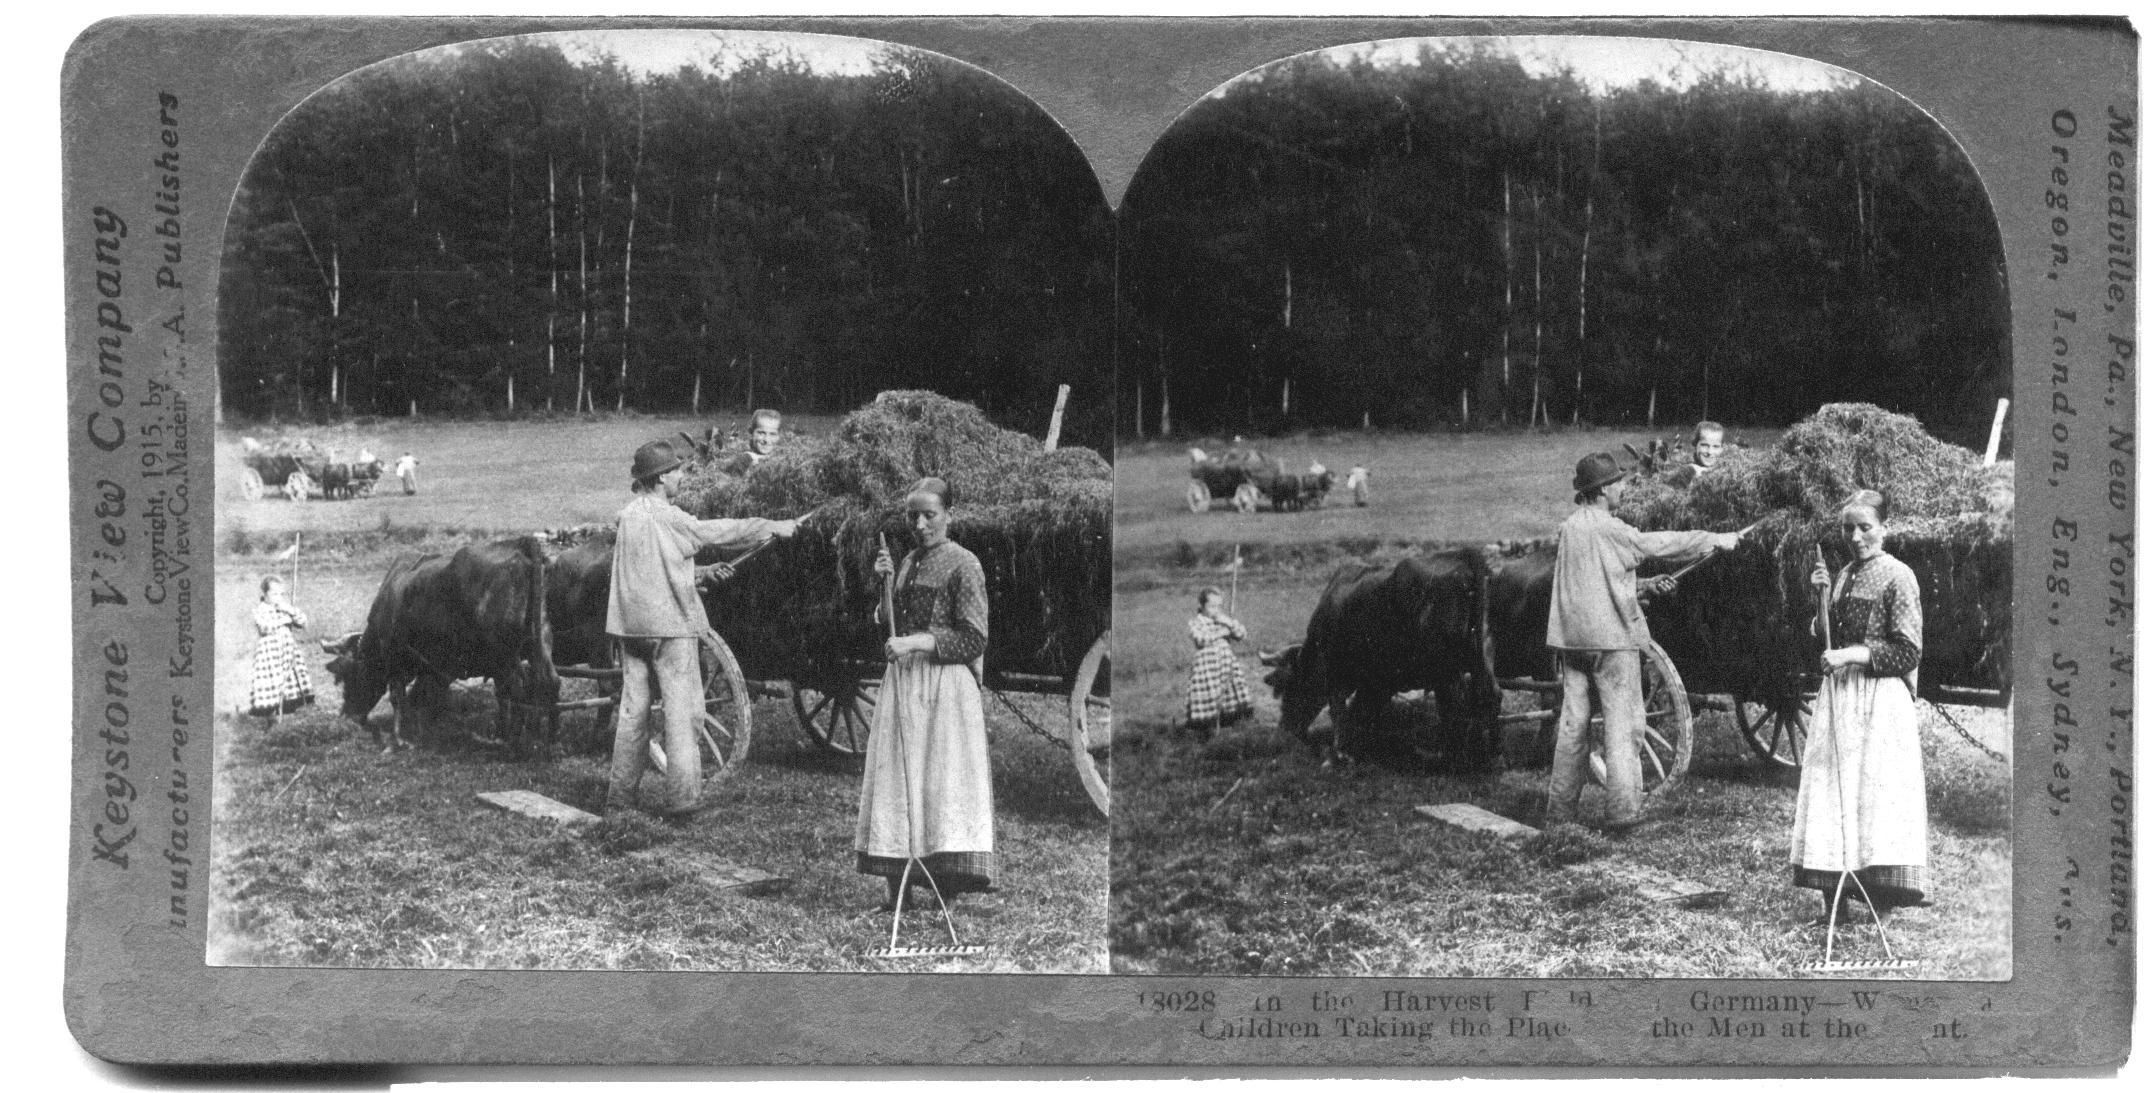 In the Harvest Field, Germany--Women and Children Taking the Place of the Men at the Front